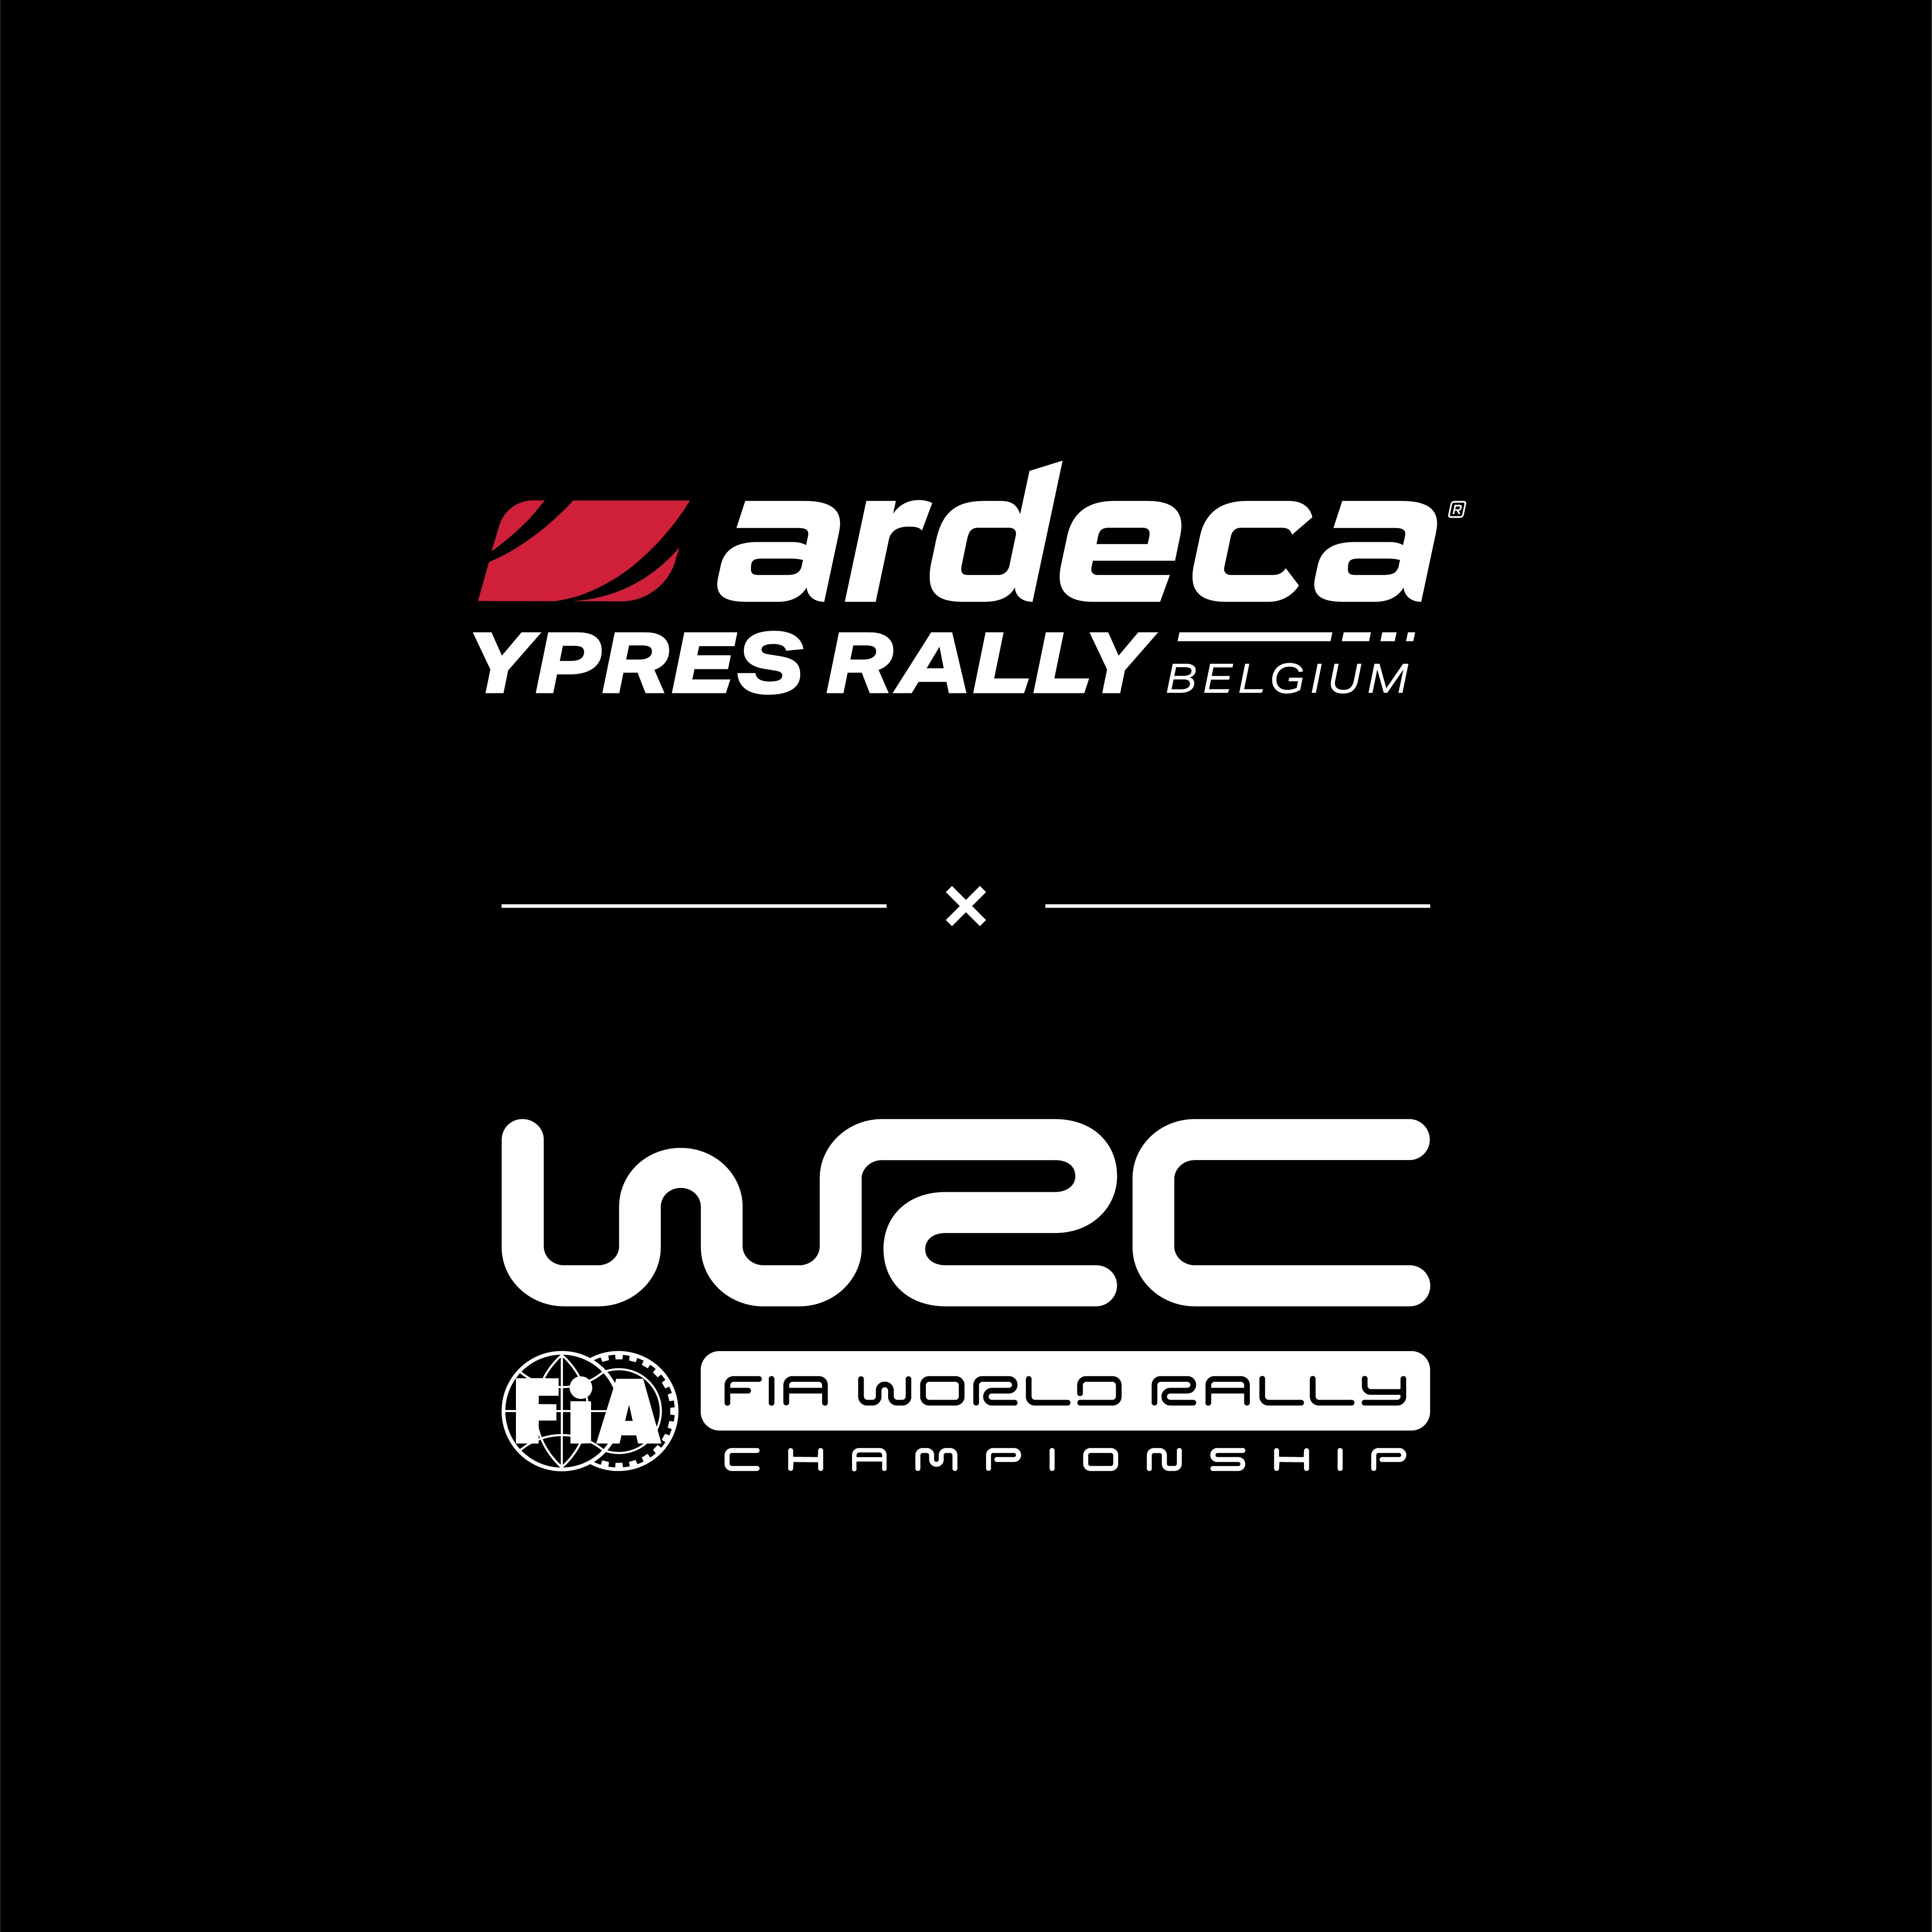 ARDECA YPRES RALLY FOR THE NEXT 3 YEARS!